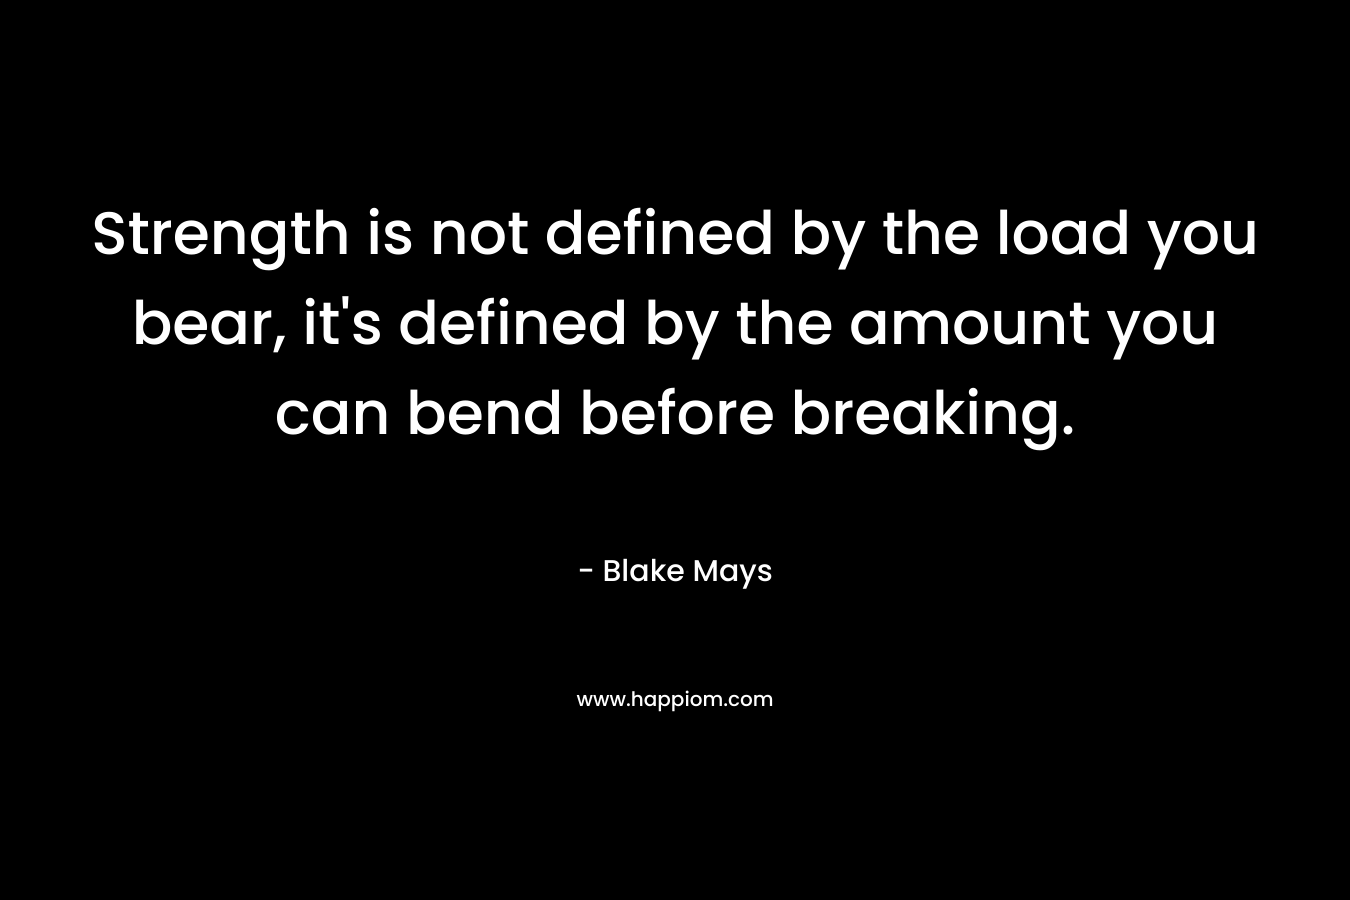 Strength is not defined by the load you bear, it's defined by the amount you can bend before breaking.